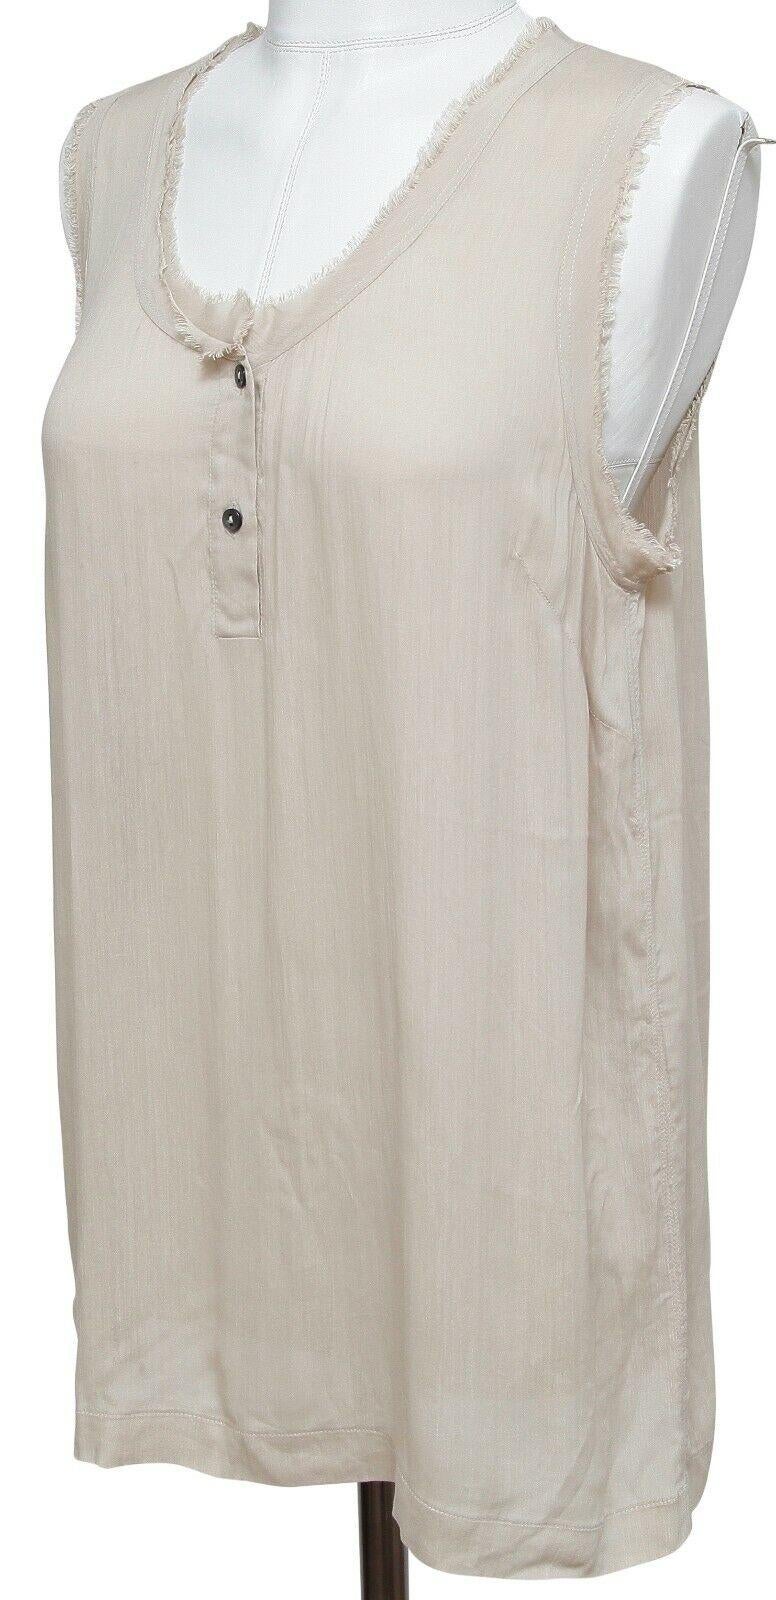 DOLCE & GABBANA Sleeveless Shirt Top Beige Buttons Viscose Silk Sz 42 In Fair Condition For Sale In Hollywood, FL